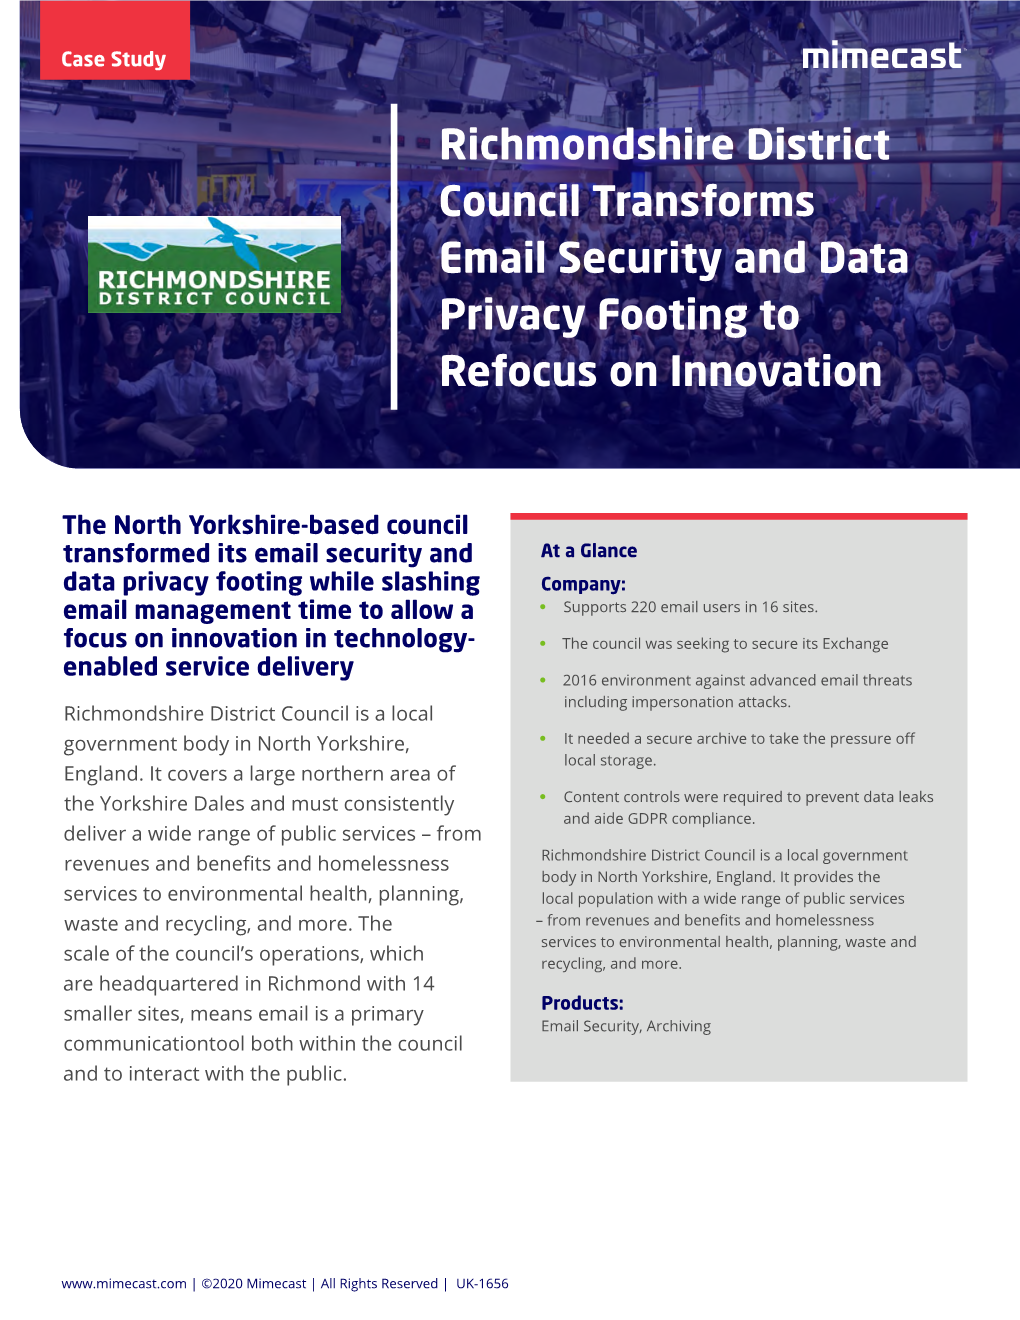 Richmondshire District Council Transforms Email Security and Data Privacy Footing to Refocus on Innovation